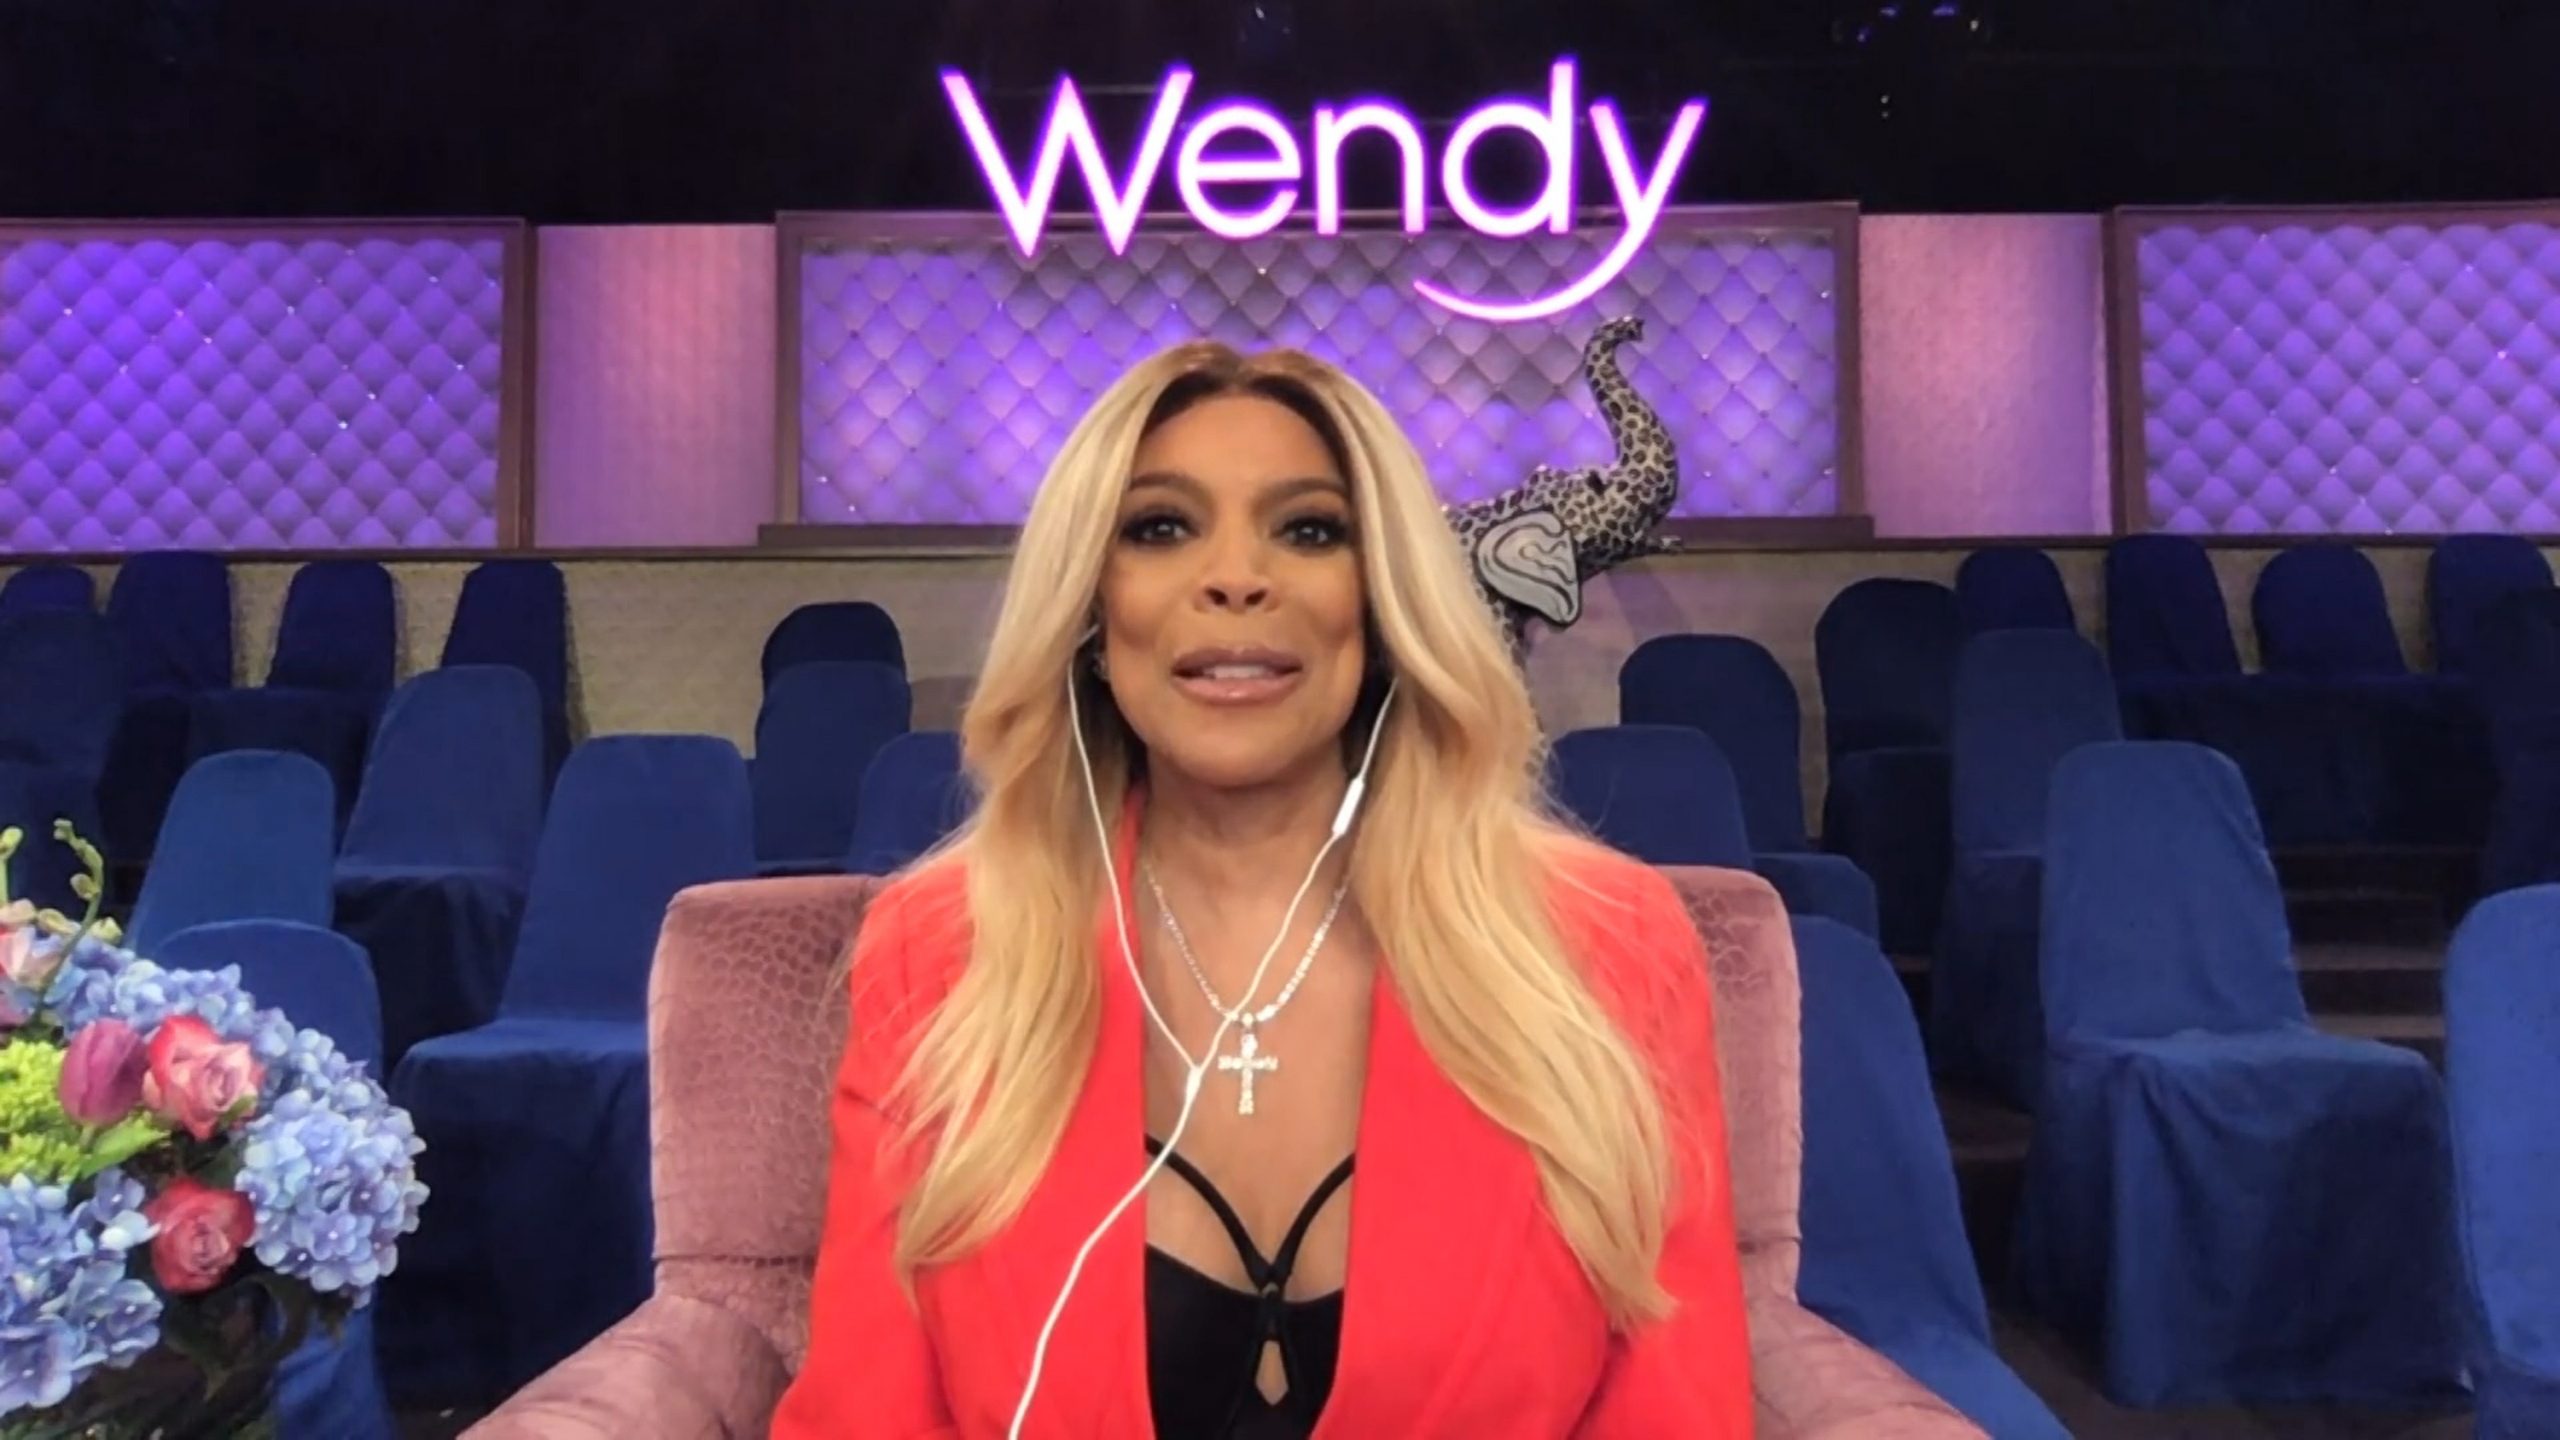 ‘The Wendy Williams Show’ Confirms Guest Hosts for March 2022 as Sherri Shepherd Gets Ready to Take Over